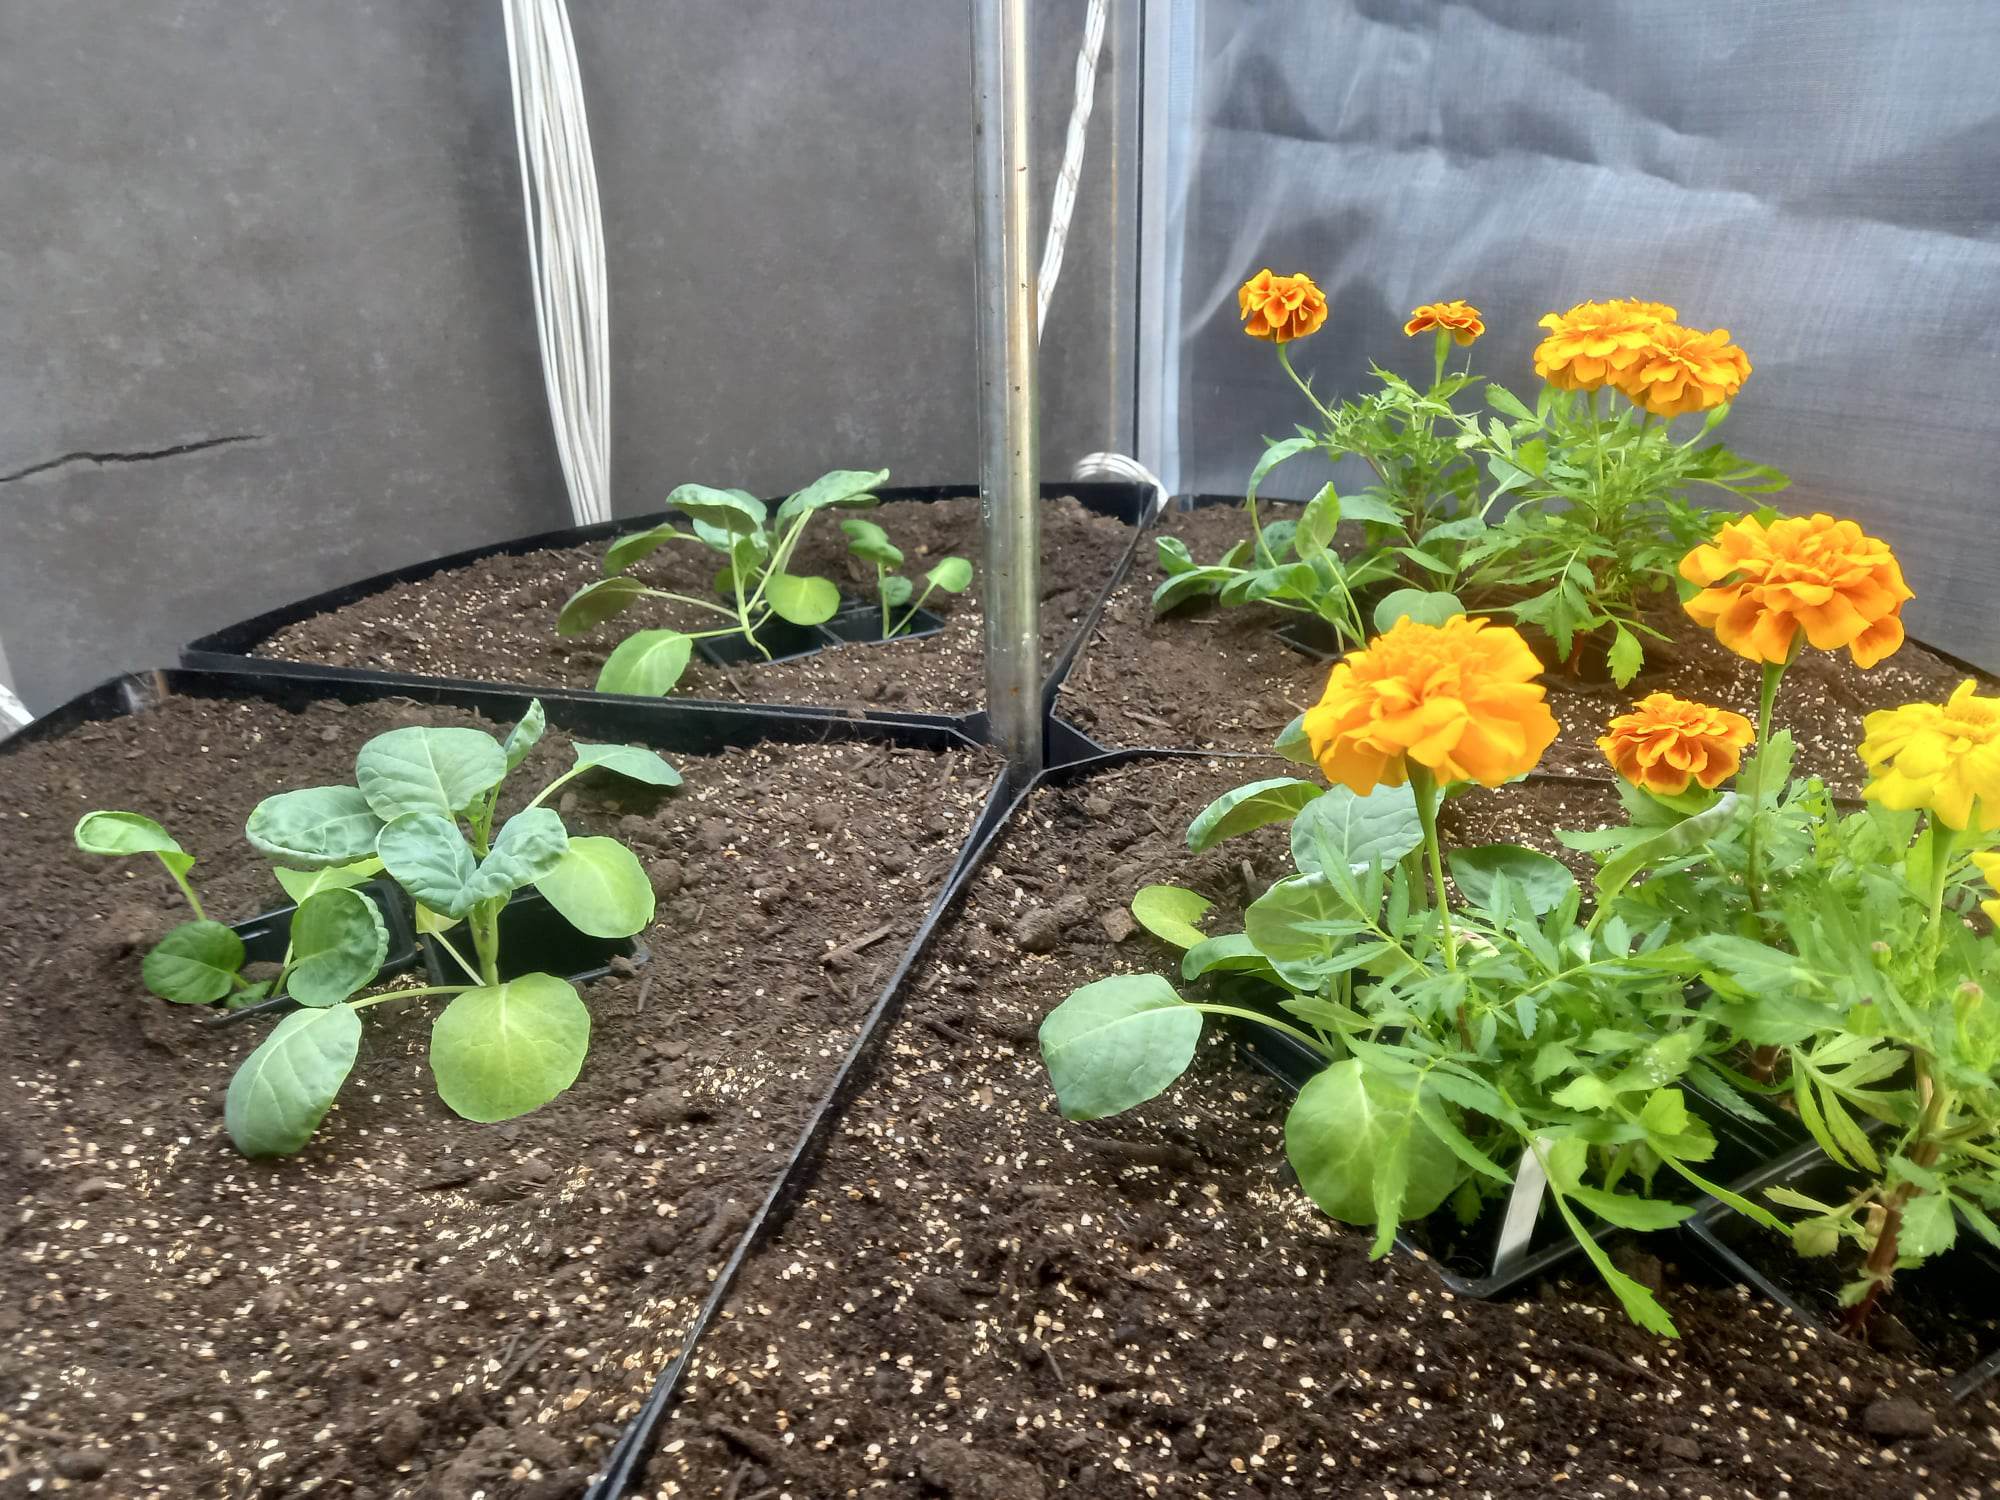 Photograph of example companion planting using marigolds and brassicas